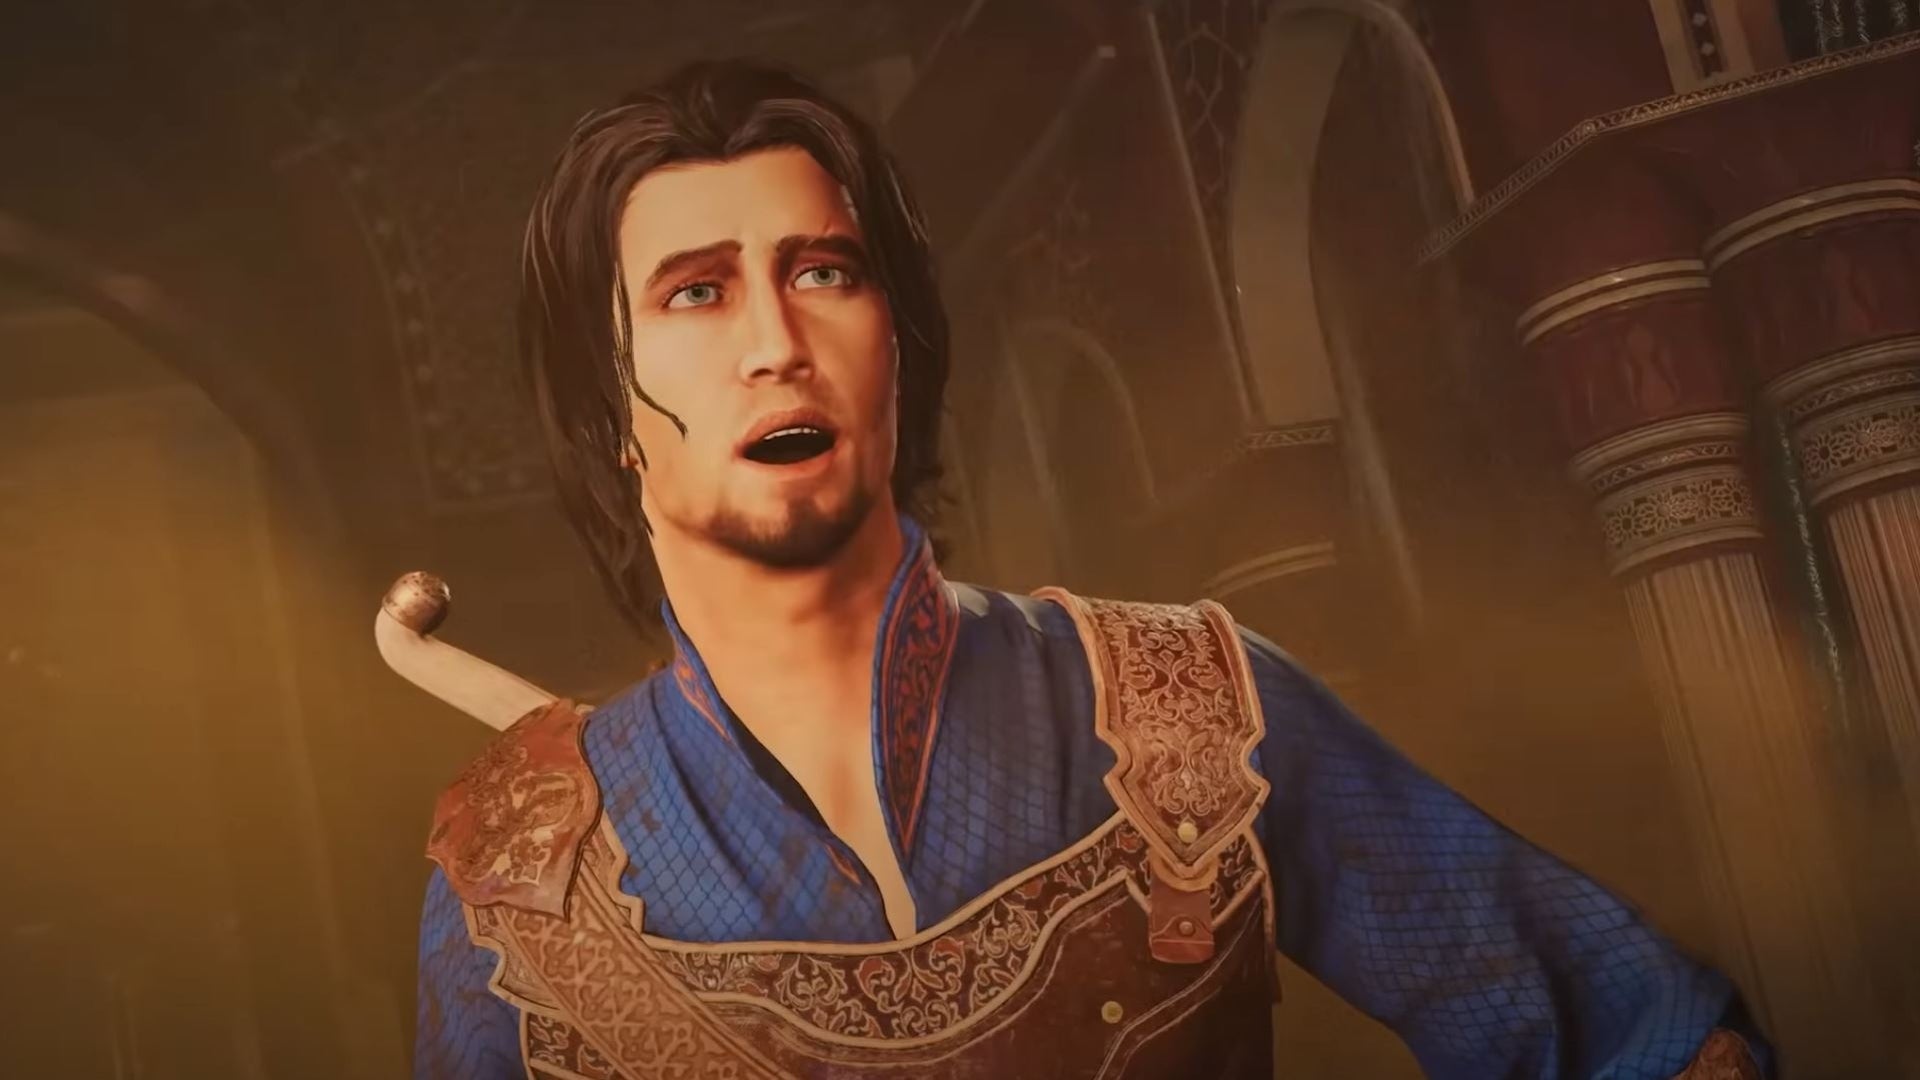 Prince Of Persia: The Sands Of Time Remake has been delayed indefinitely, again